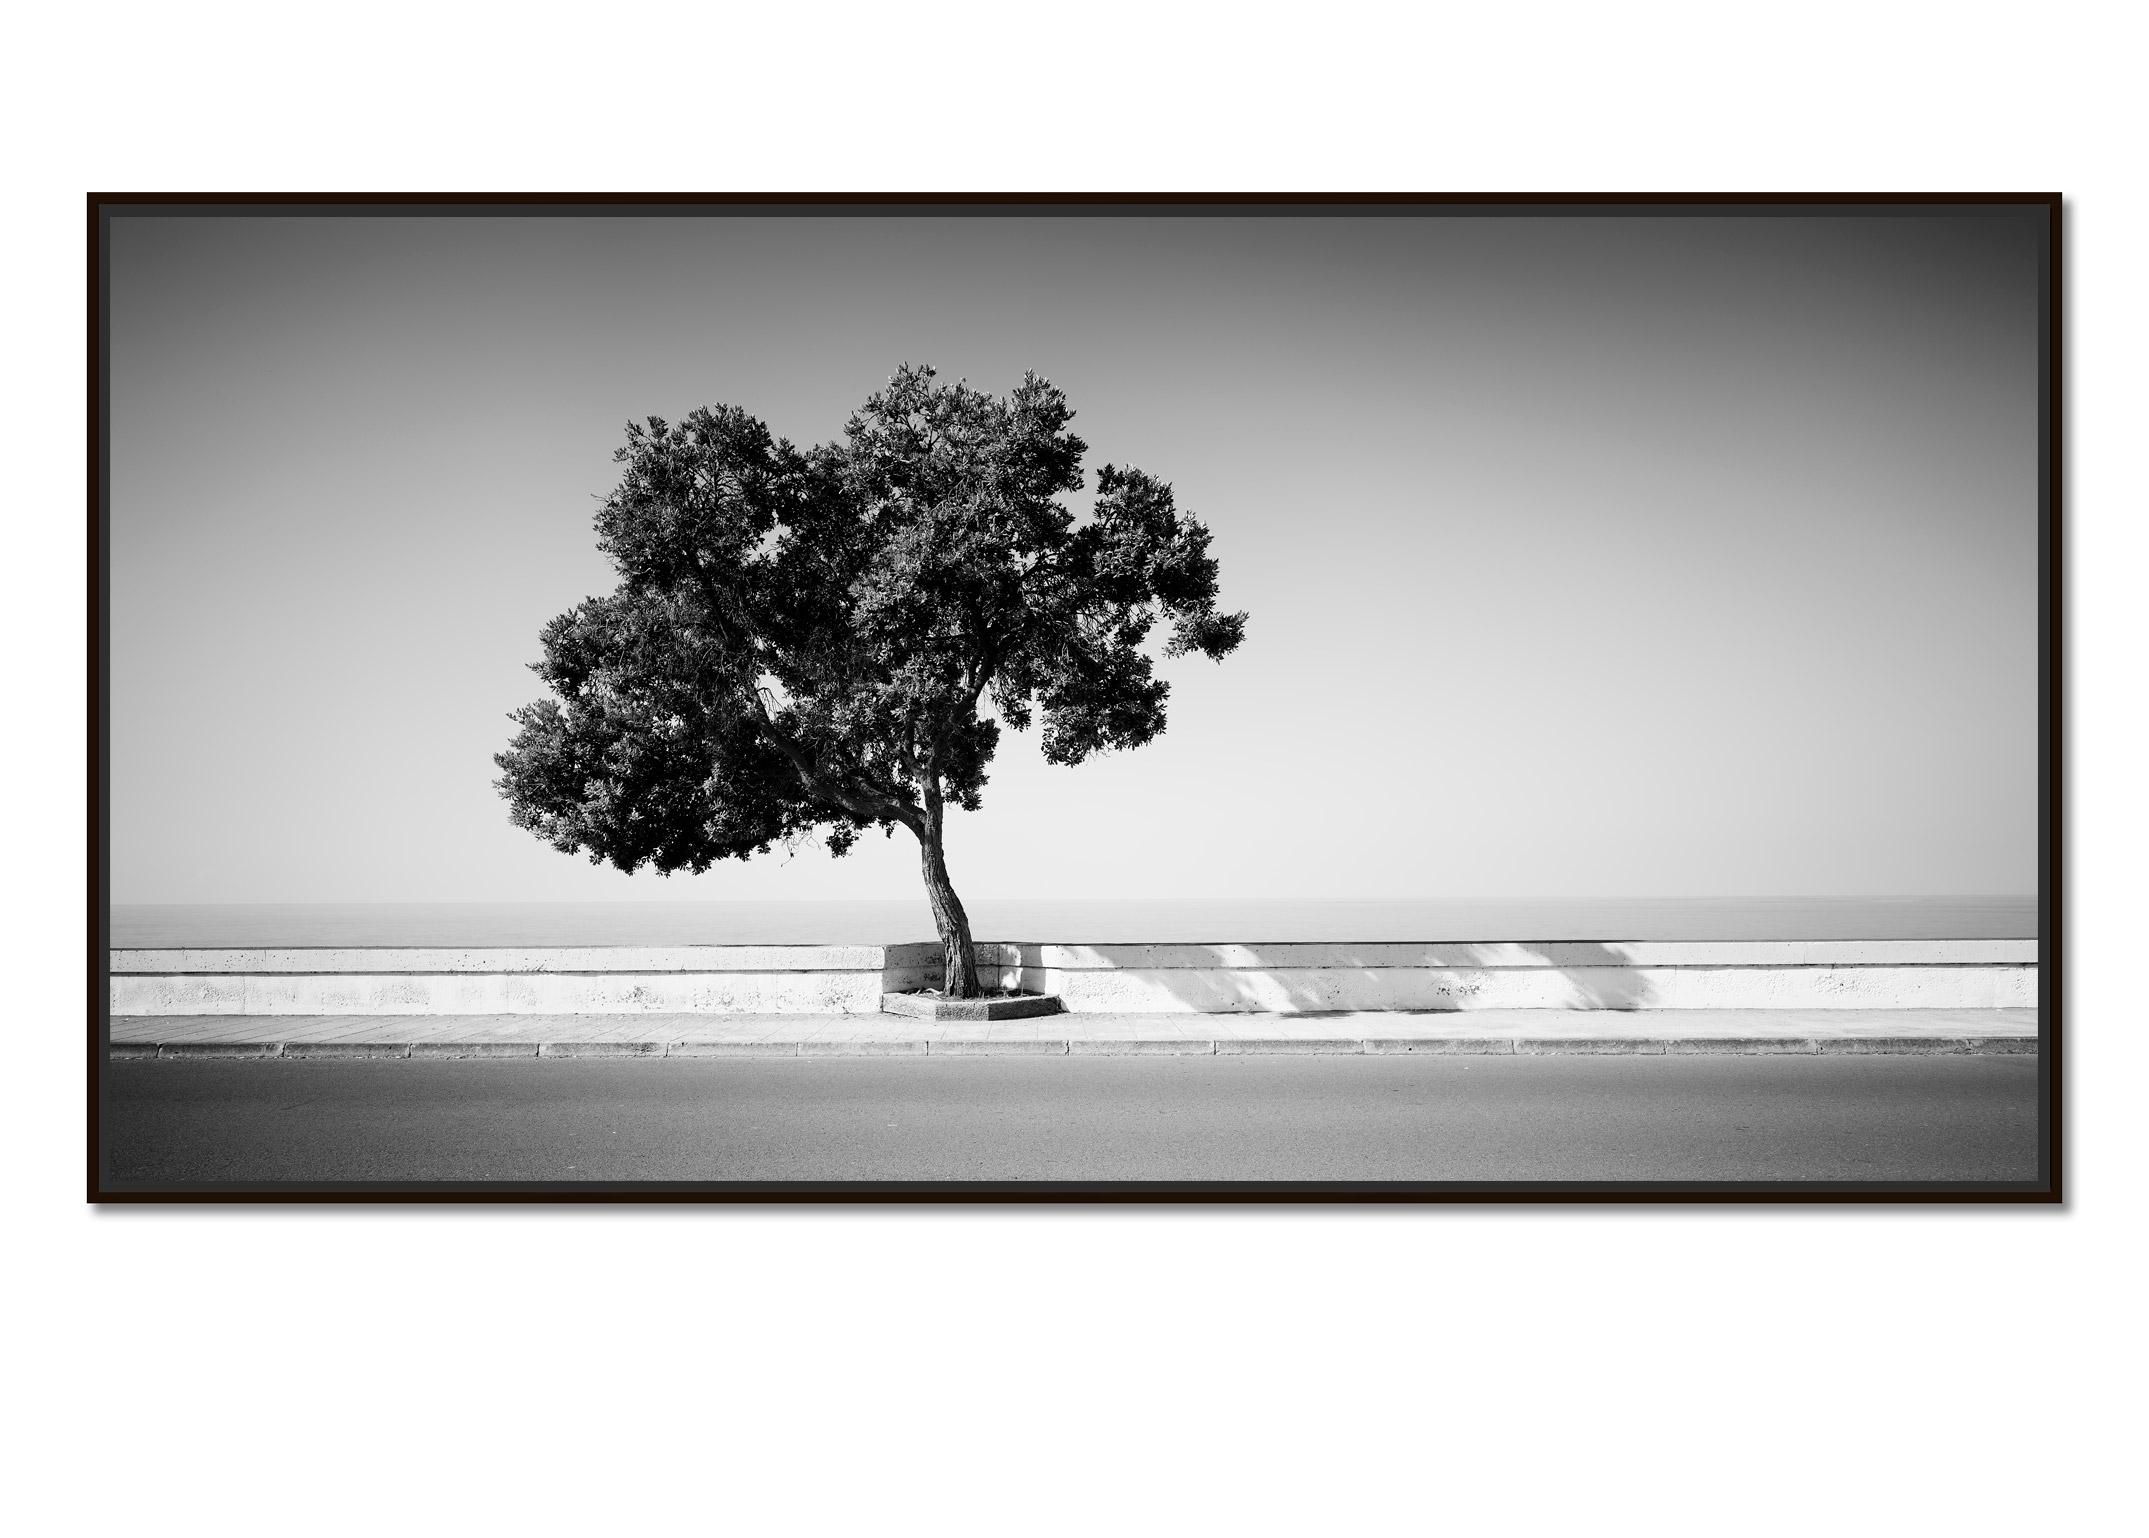 Tree on the Waterfront, Portugal, black and white photography, art landscape - Photograph by Gerald Berghammer